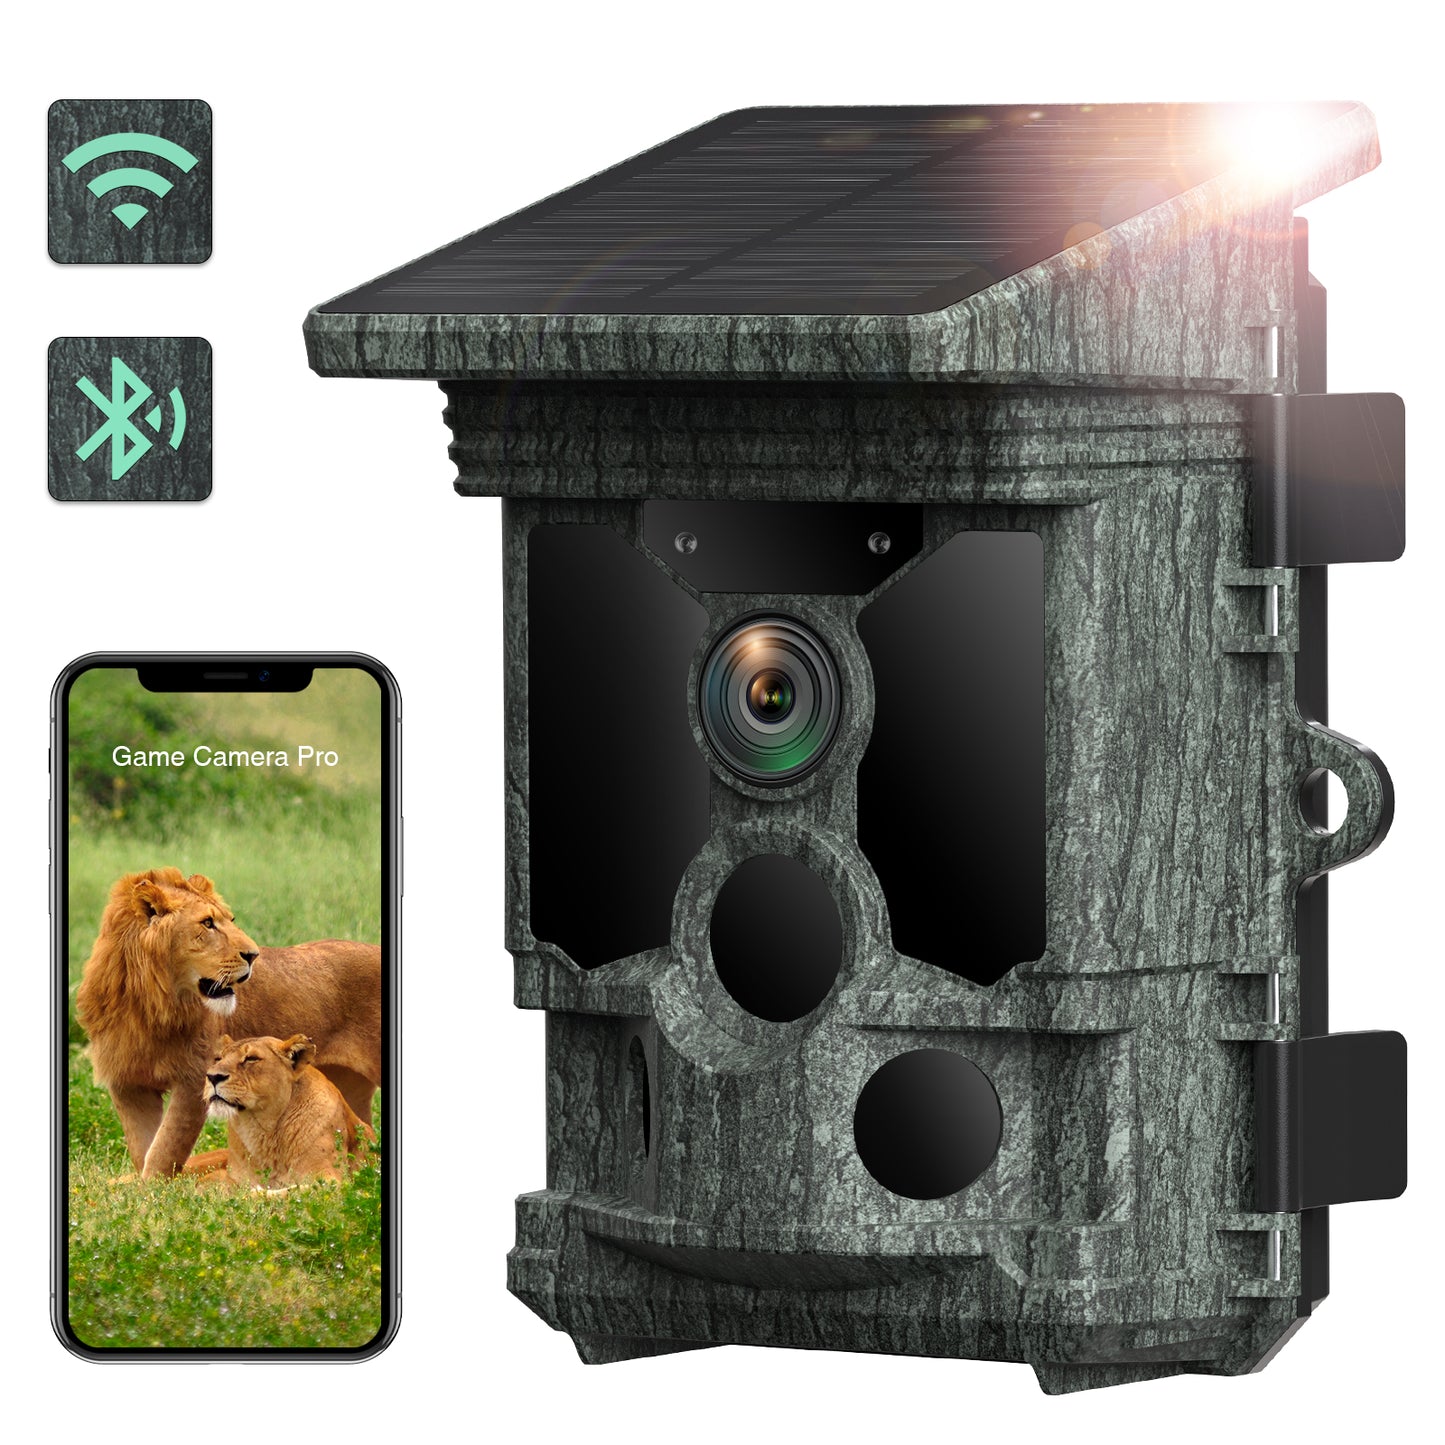 CAMPARK Trail Camera Solar Powered Native 4K 30fps 46MP Rechargeable WiFi Bluetooth Game Hunting Camera with 0.1s Trigger Time 3 PIR Sensor Night Vision Waterproof IP66 Loop Recording Deer Trail Cam